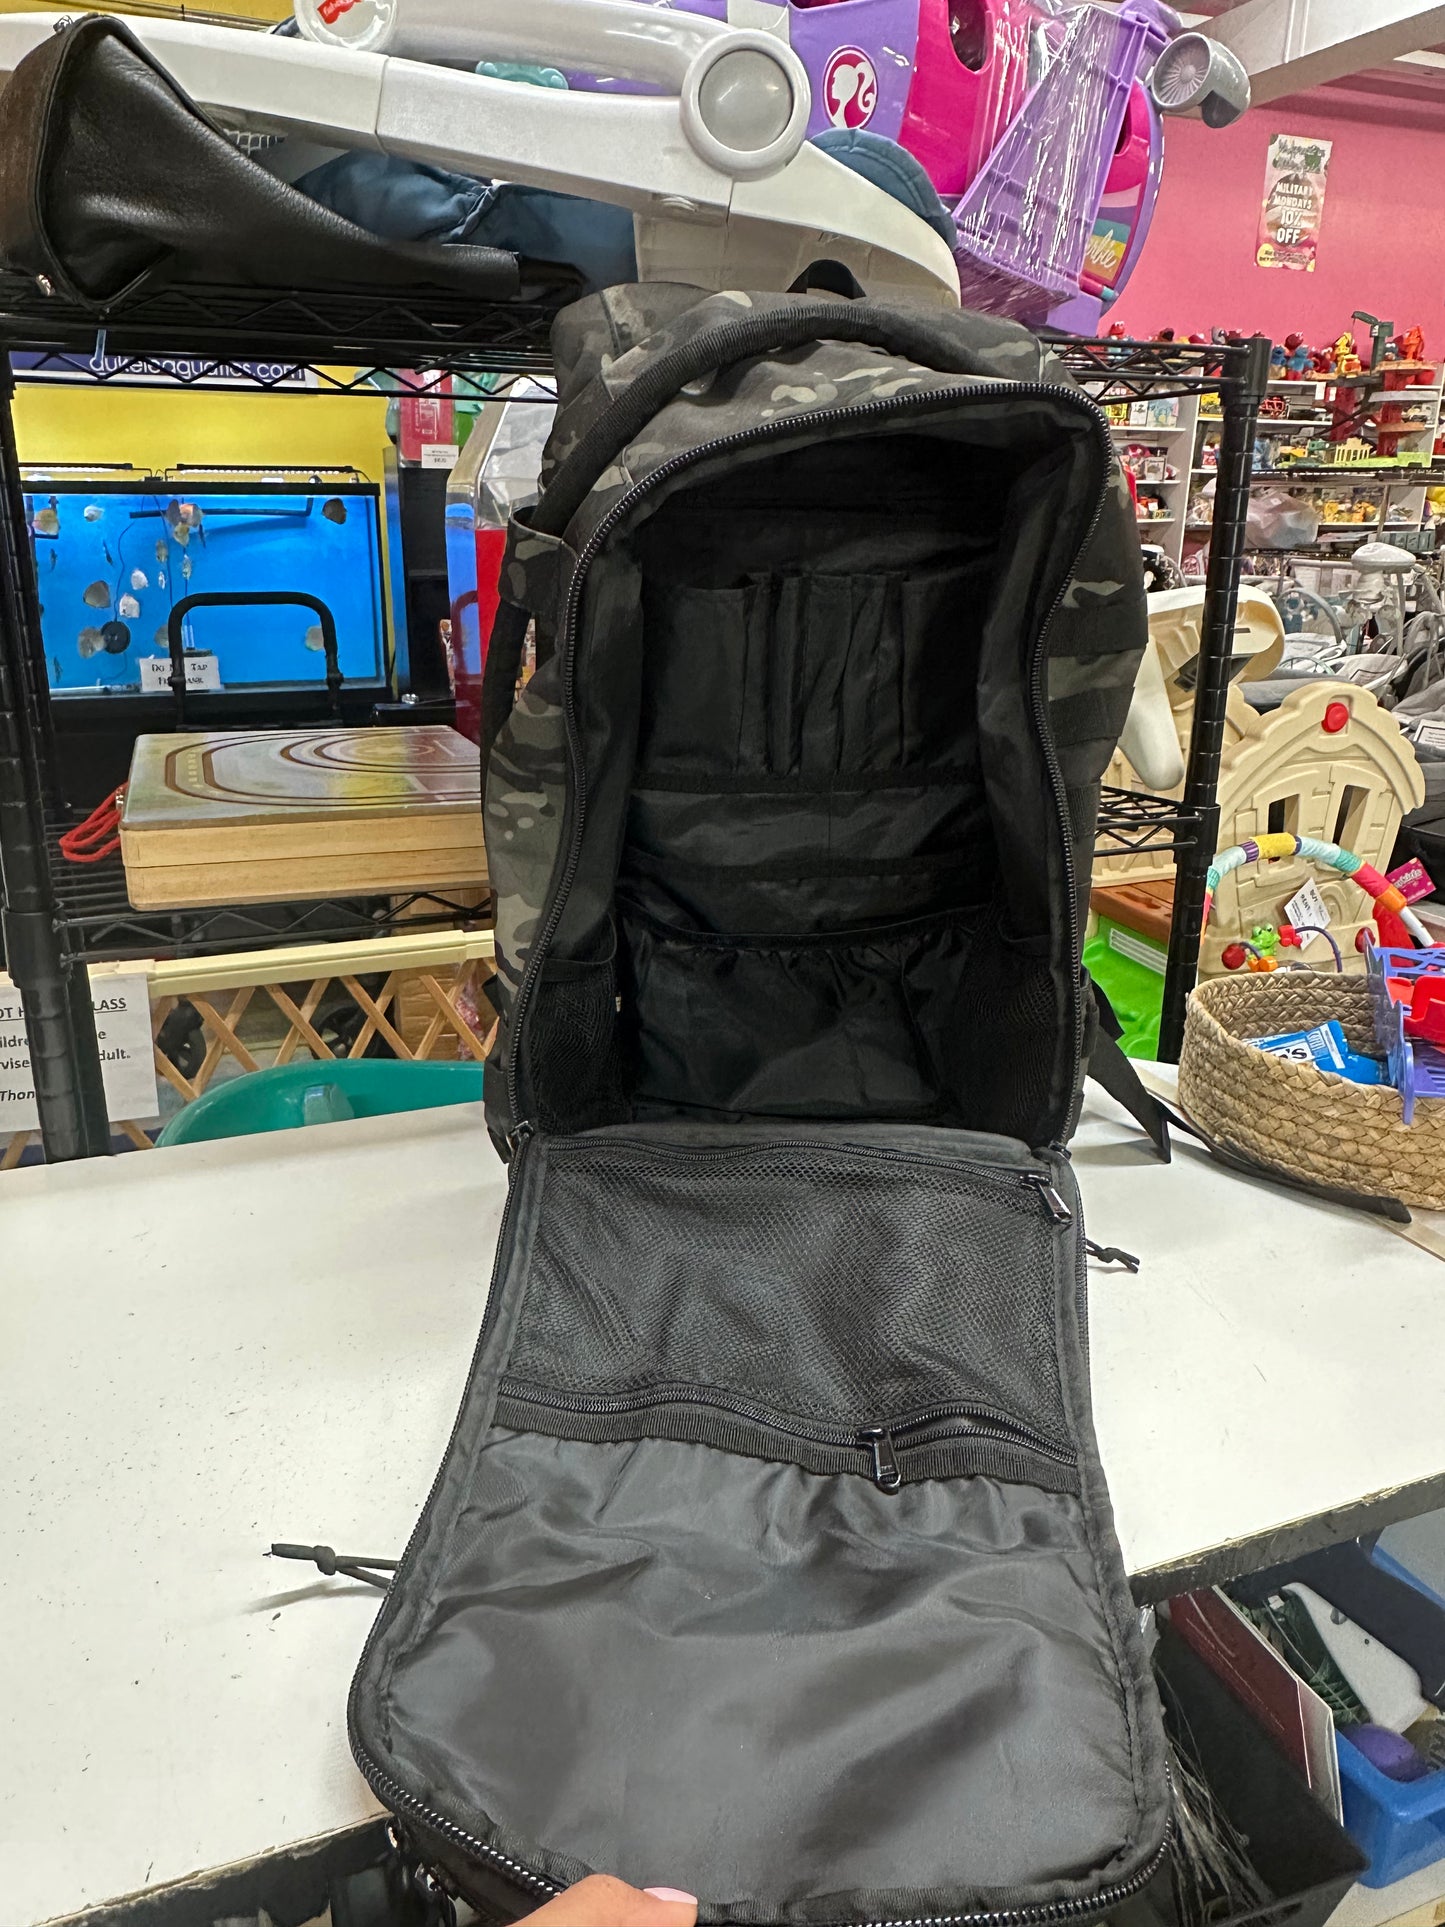 Tactical Baby Gear Diaper Backpack